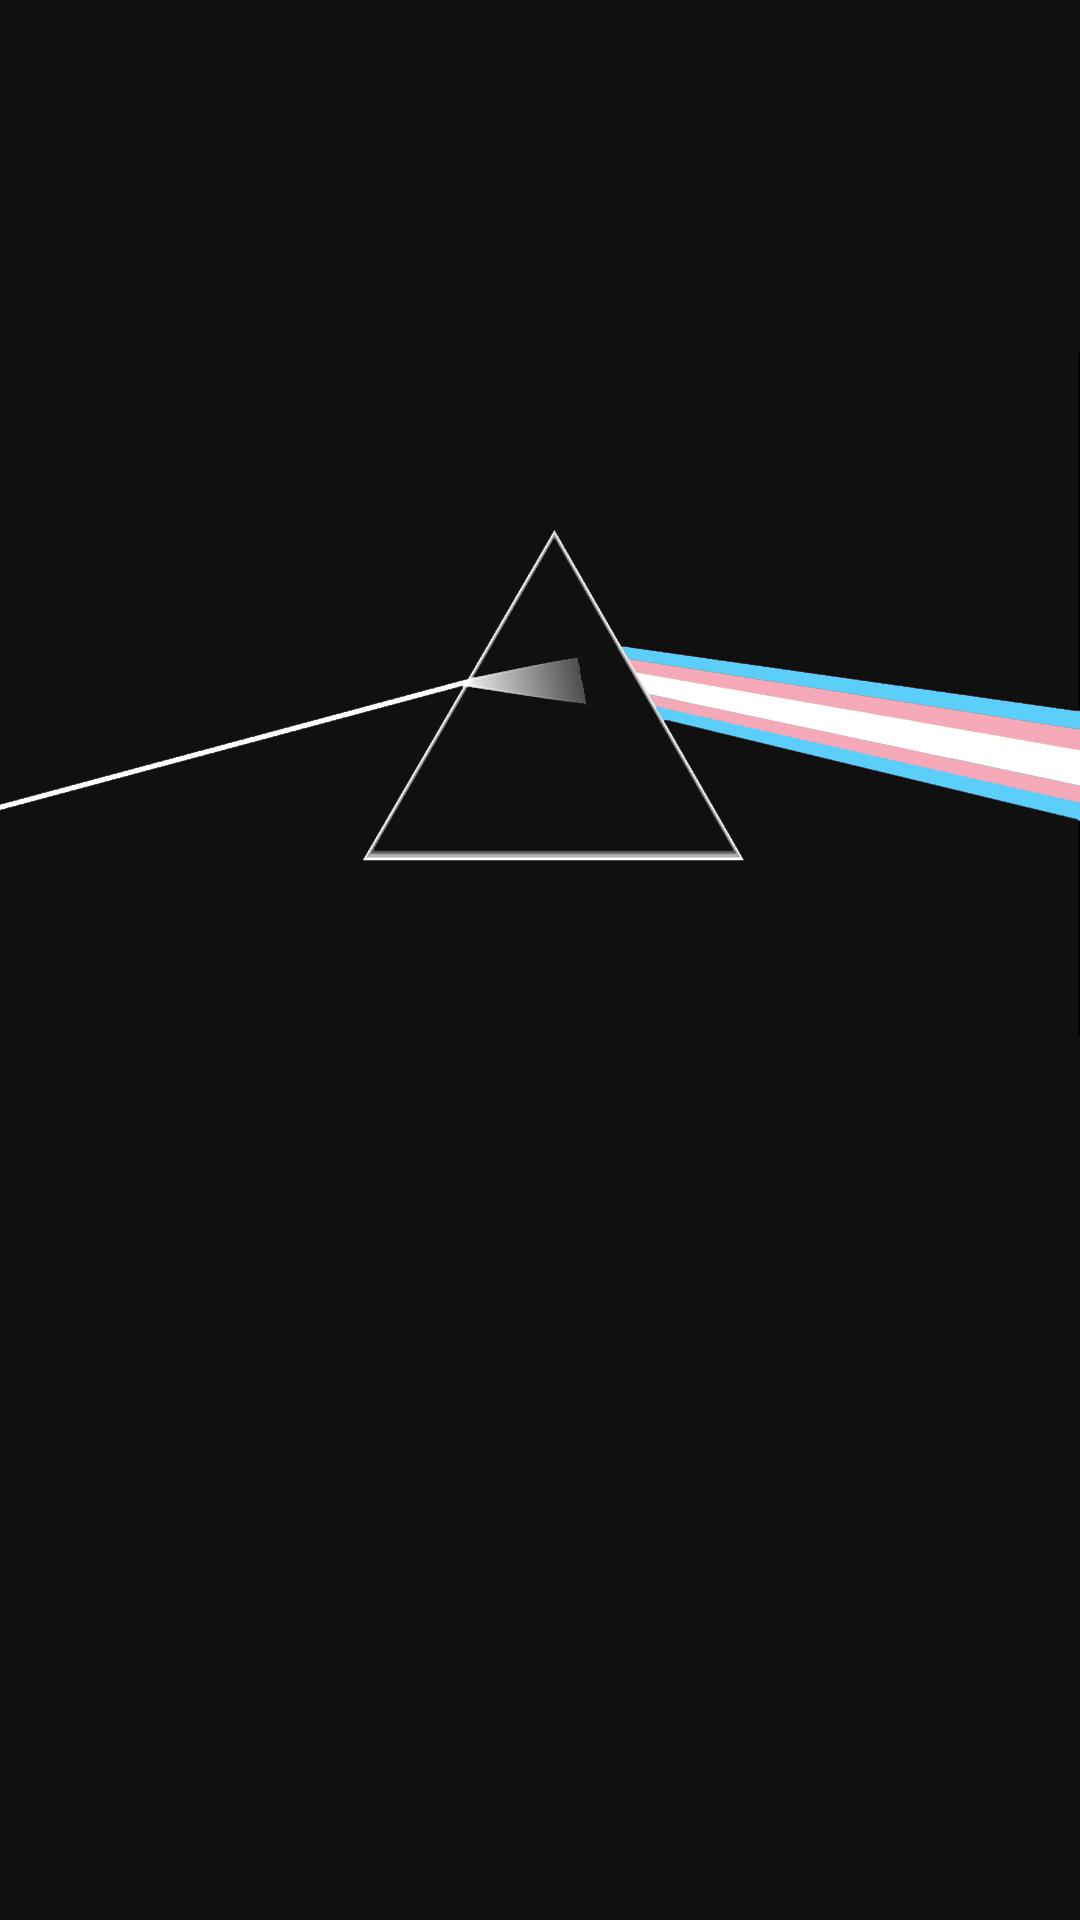 I Made A Trans Side Of The Moon Phone Wallpaper For You Guys Gals! <3